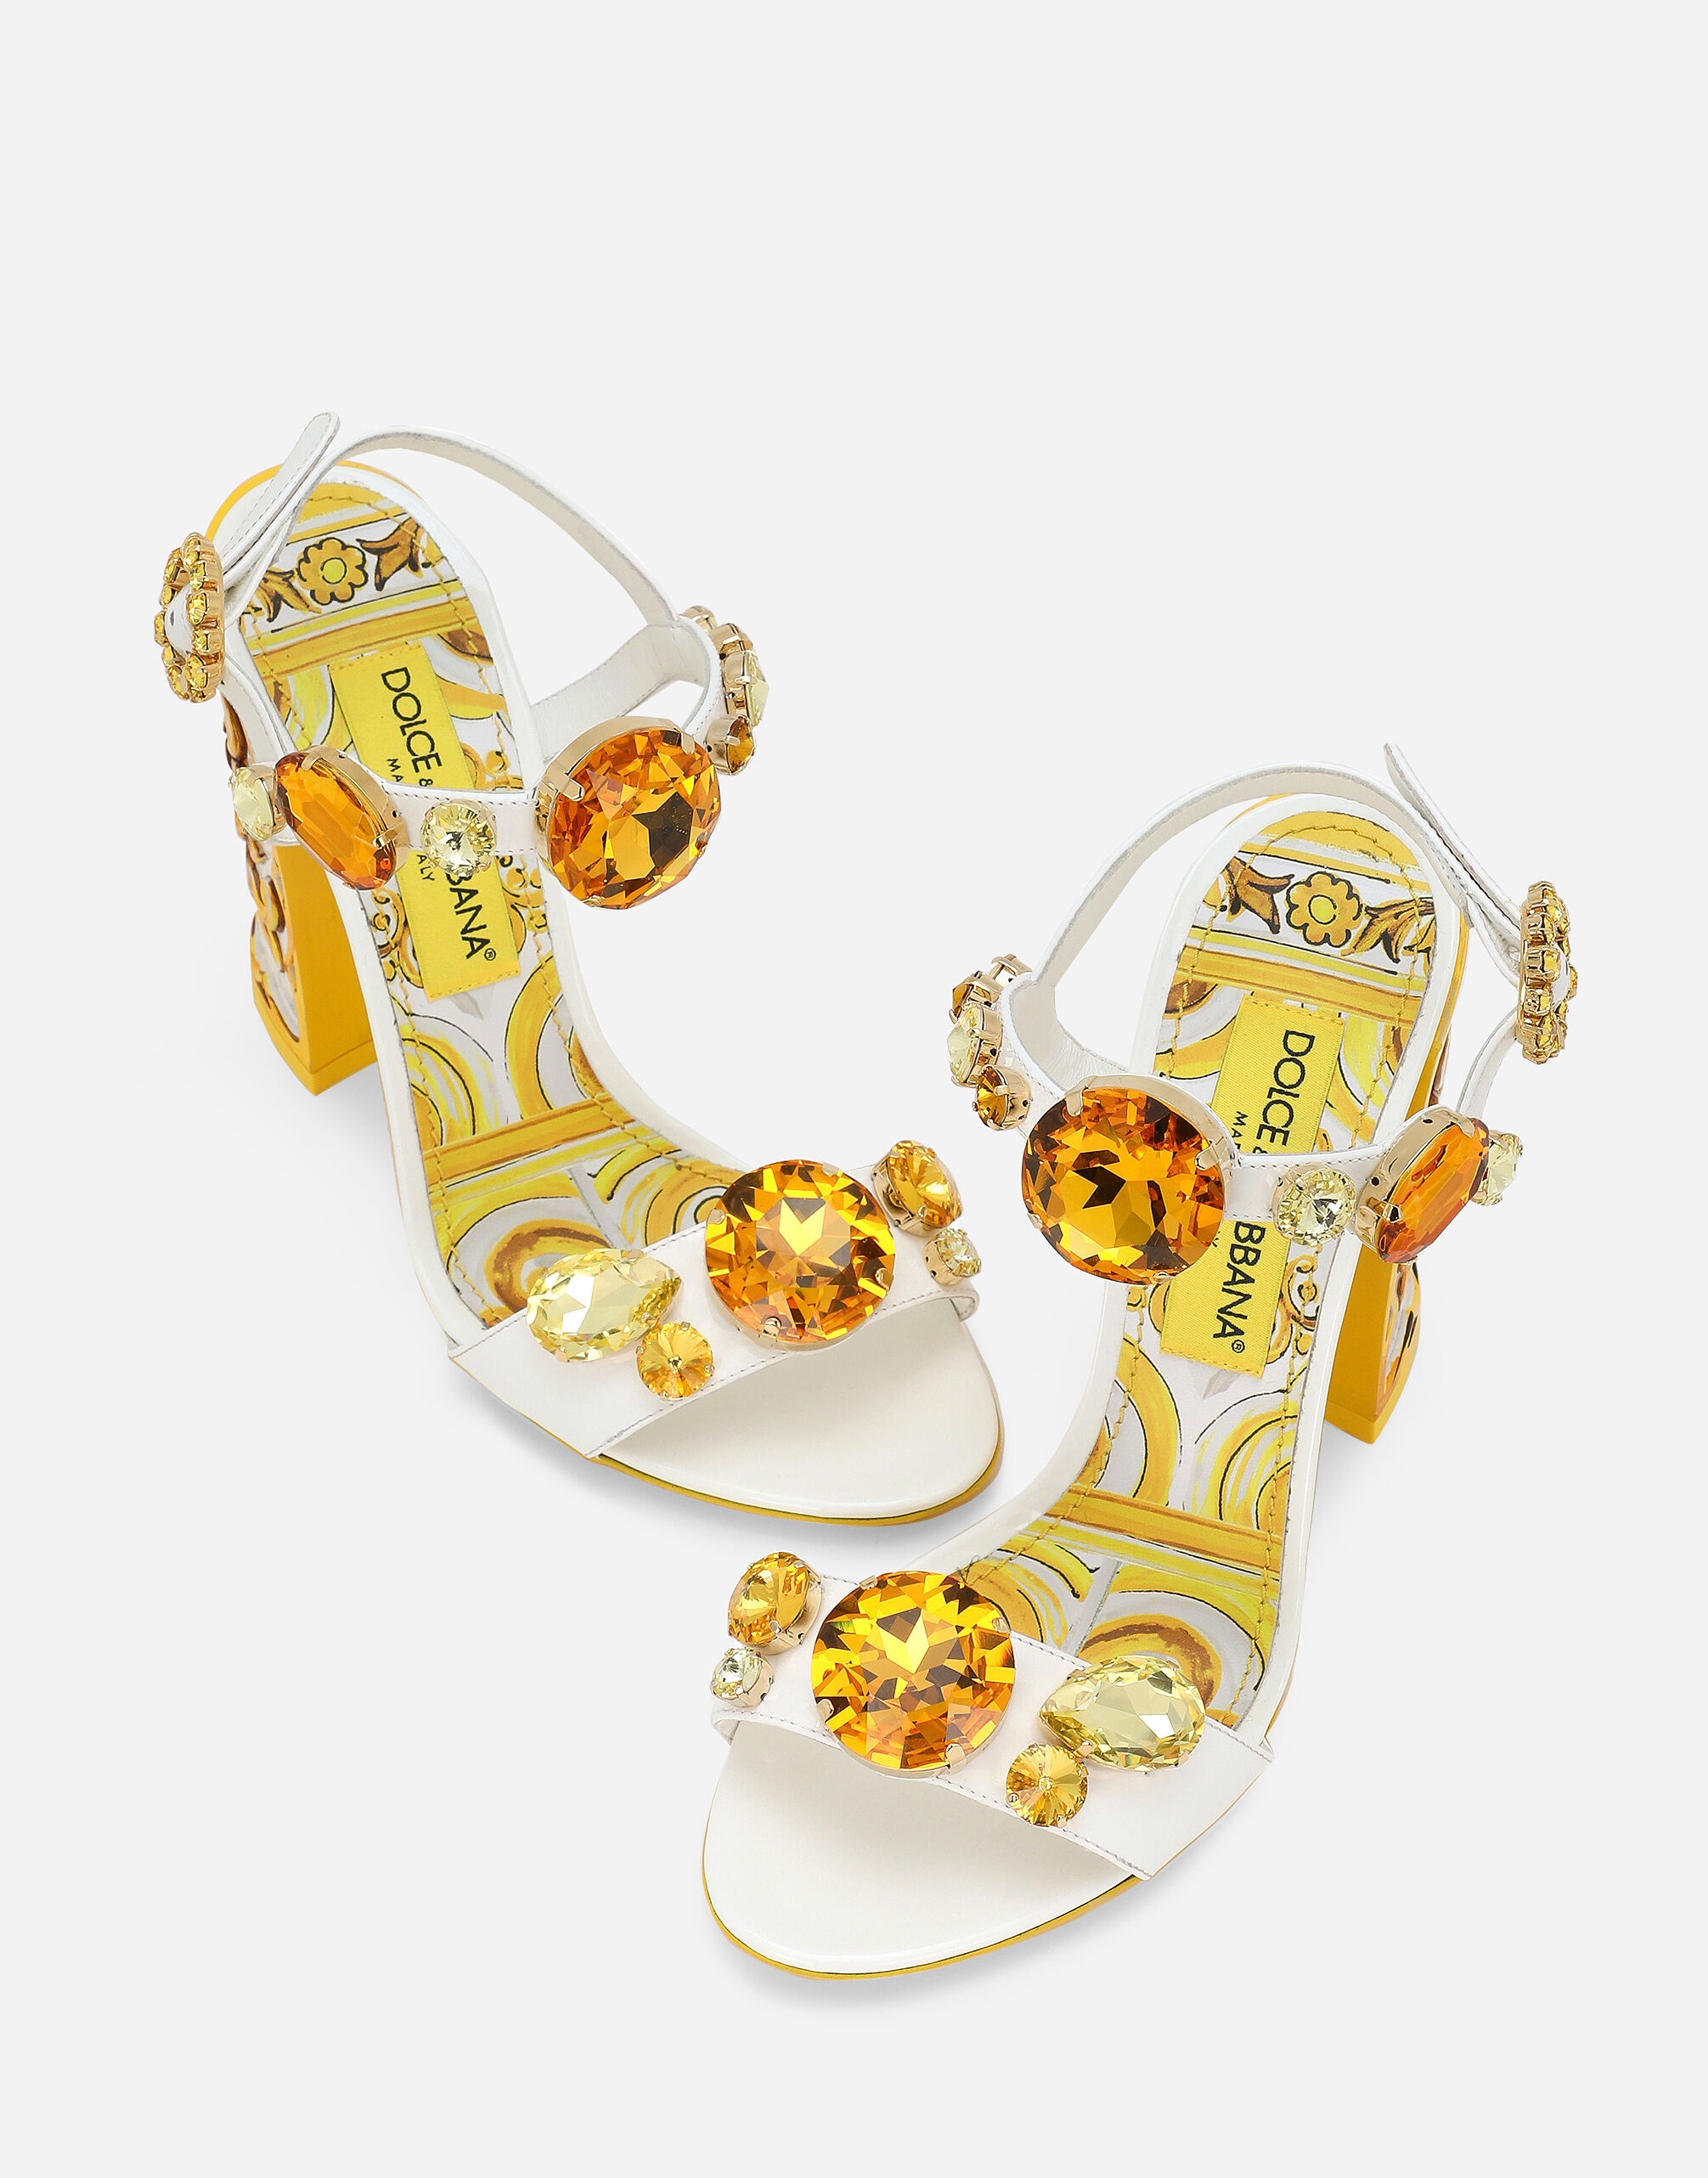 Patent leather sandals with stone embellishment and painted heel - 5